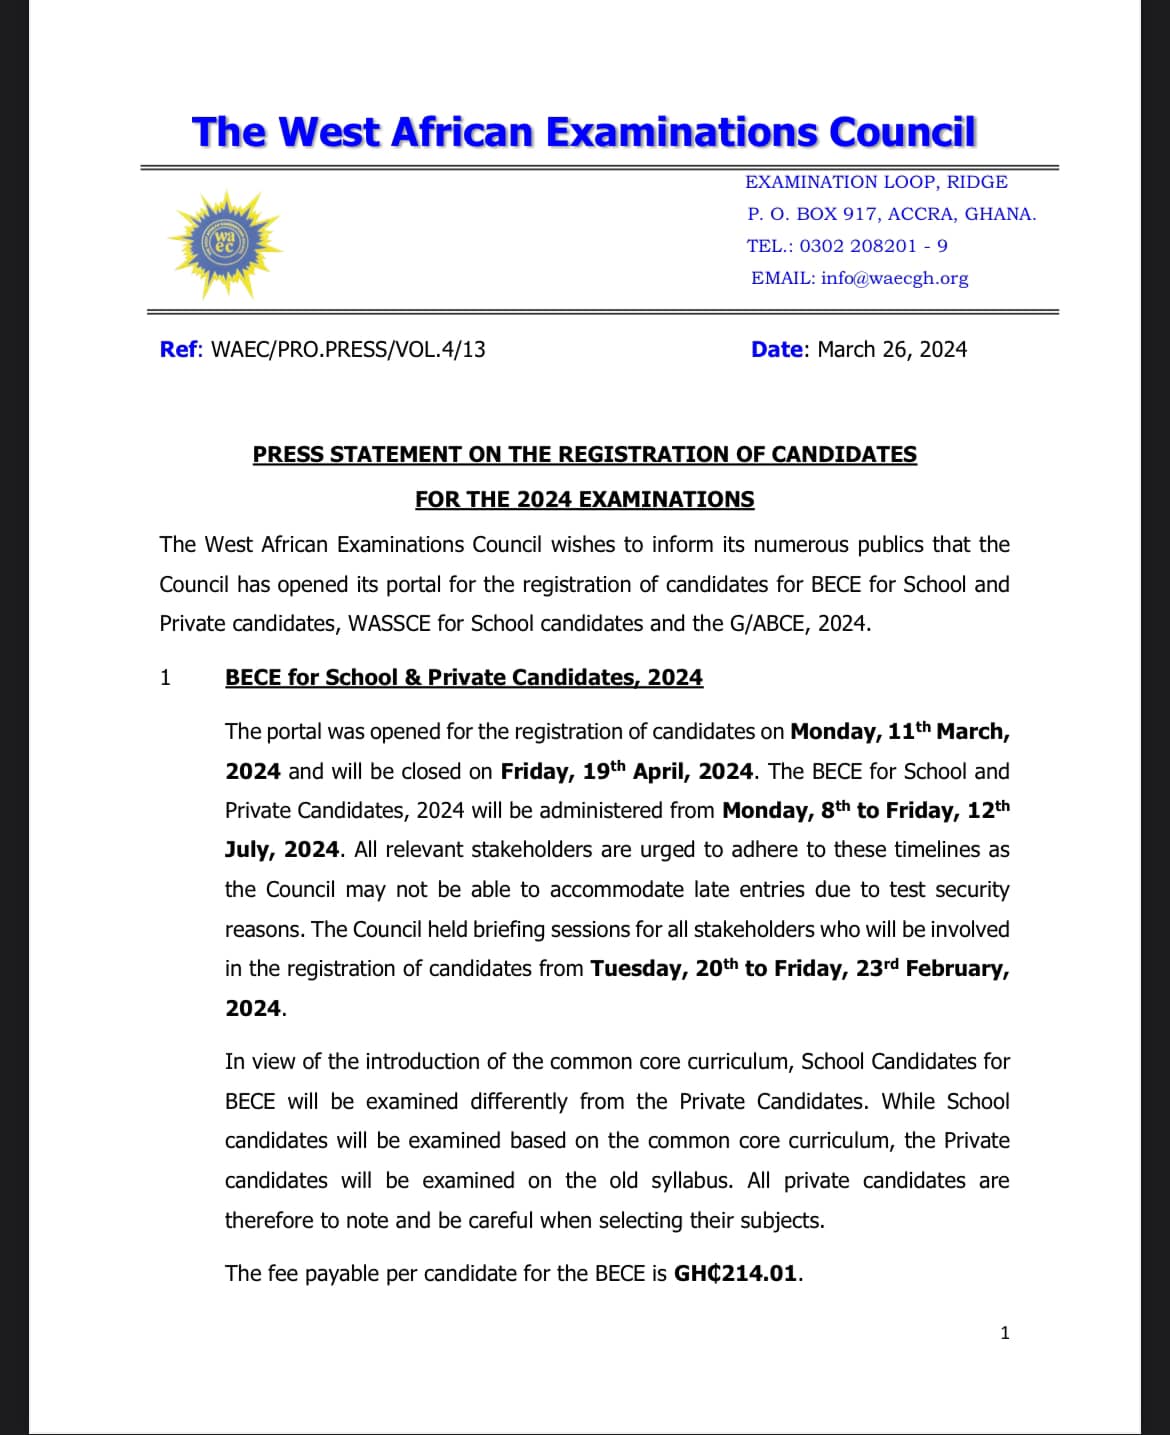 Update on 2024 Registration of BECE Candidates - March 2024